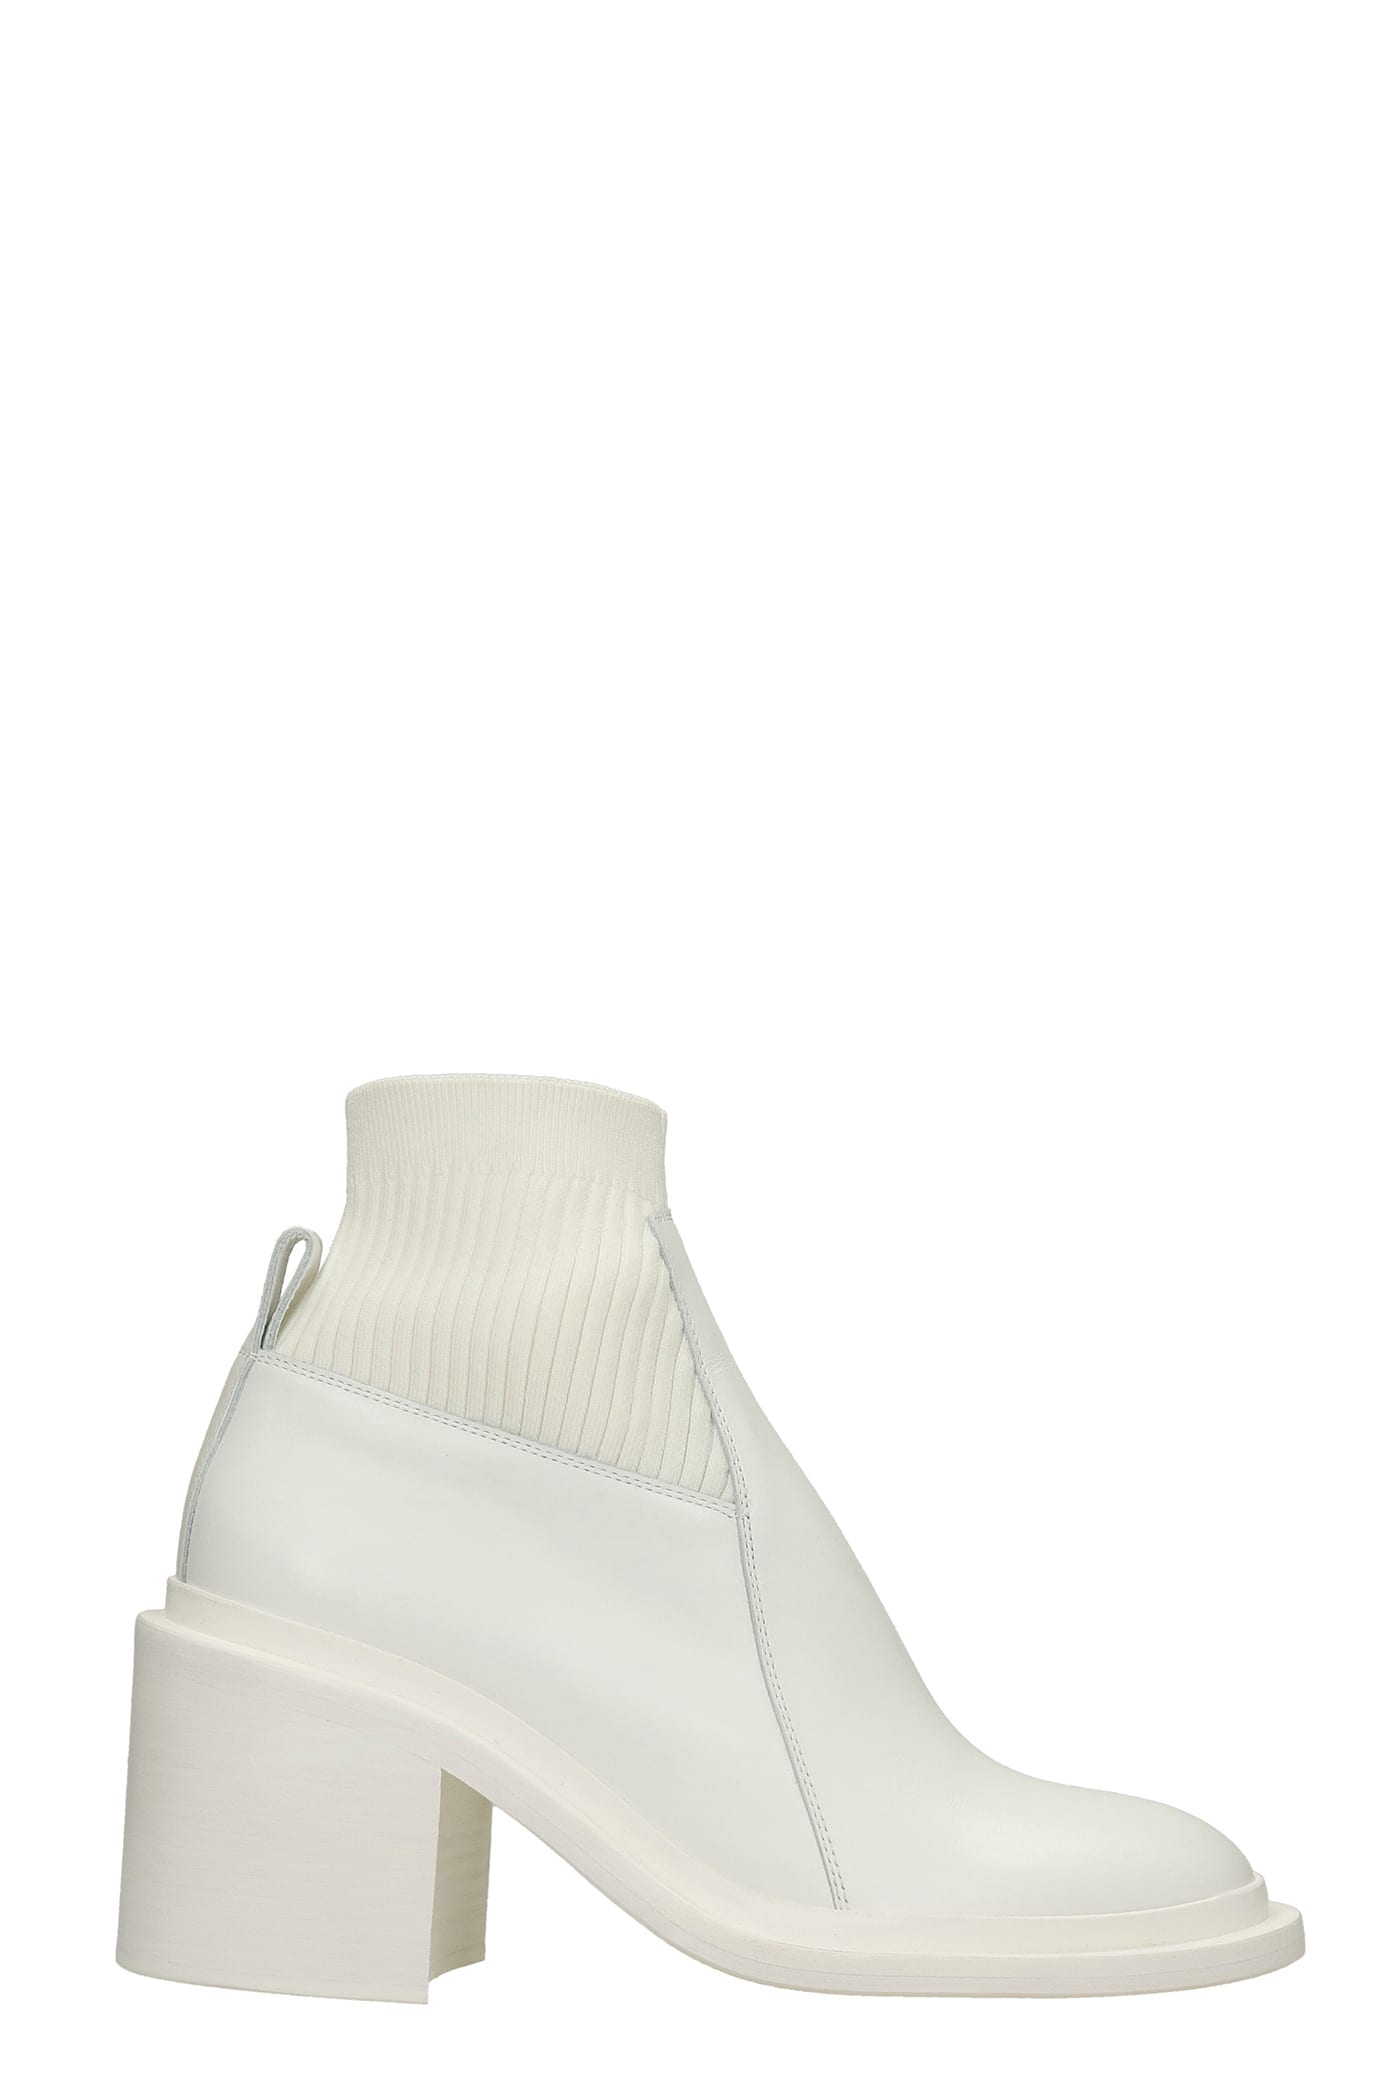 Jil Sander High Heels Ankle Boots In White Leather And Fabric